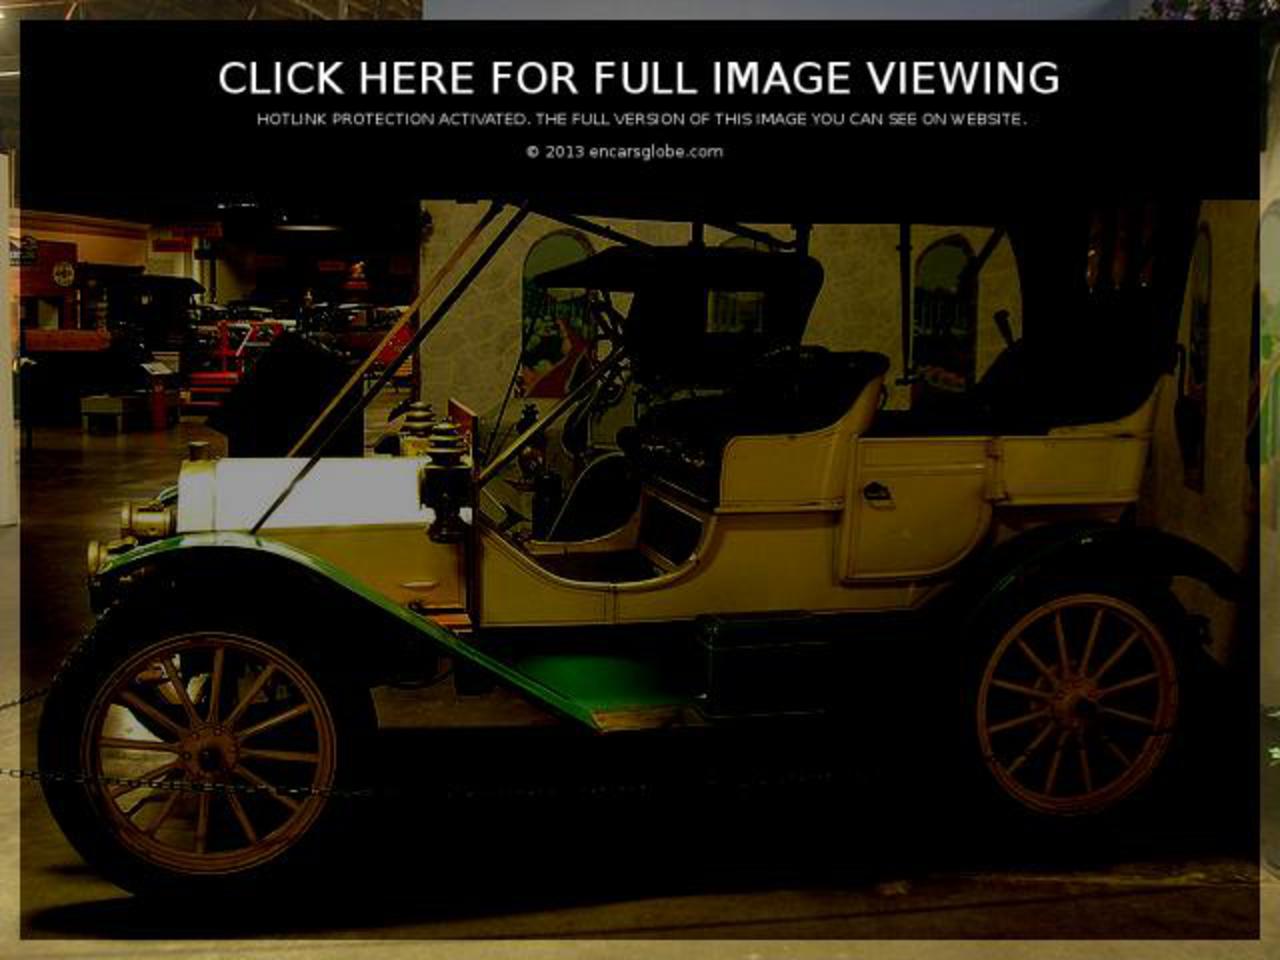 CarterCar Model H Tourin Photo Gallery: Photo #03 out of 10, Image ...